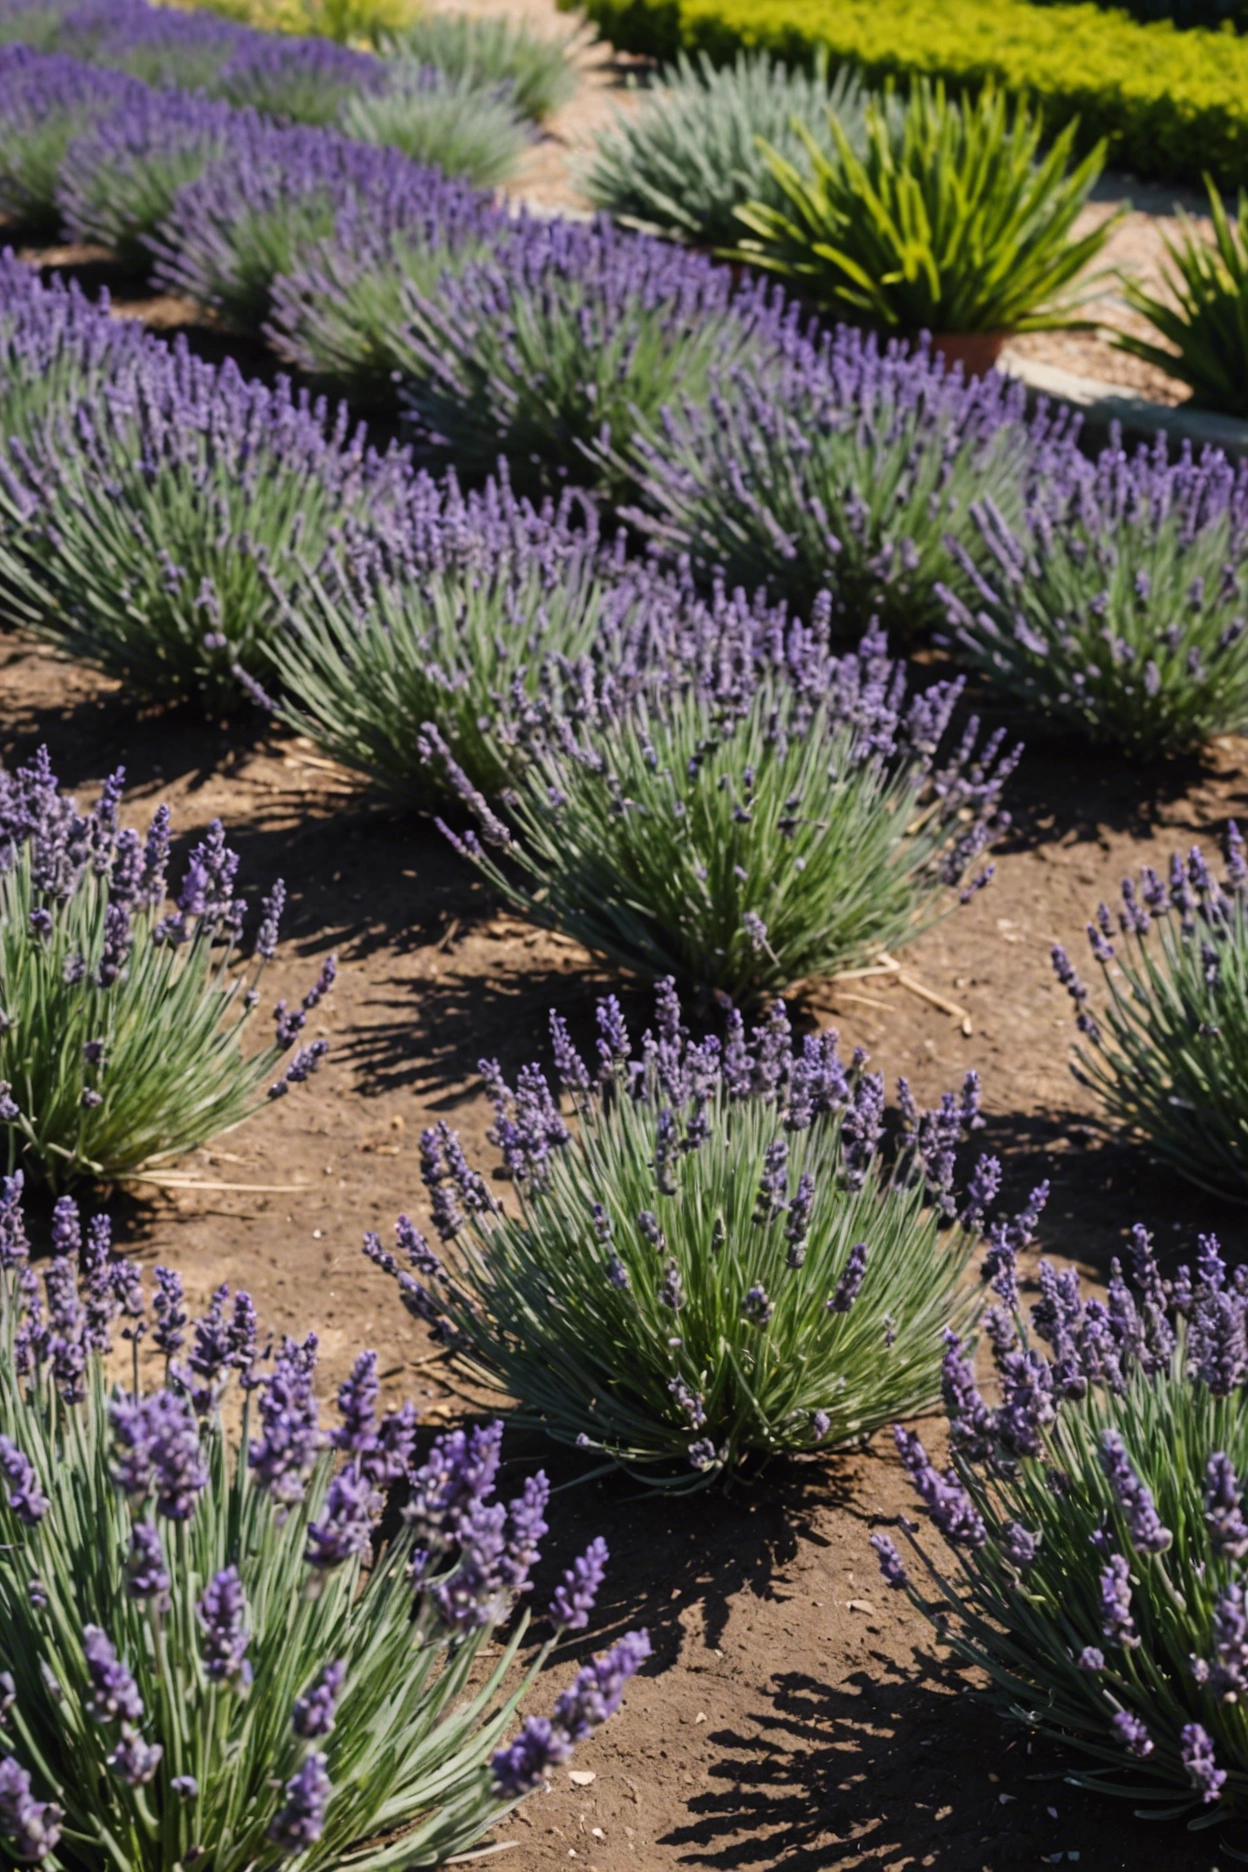 "Lavender 'Grosso' plants in a garden with optimal spacing for growth, measuring tape indicating distance."